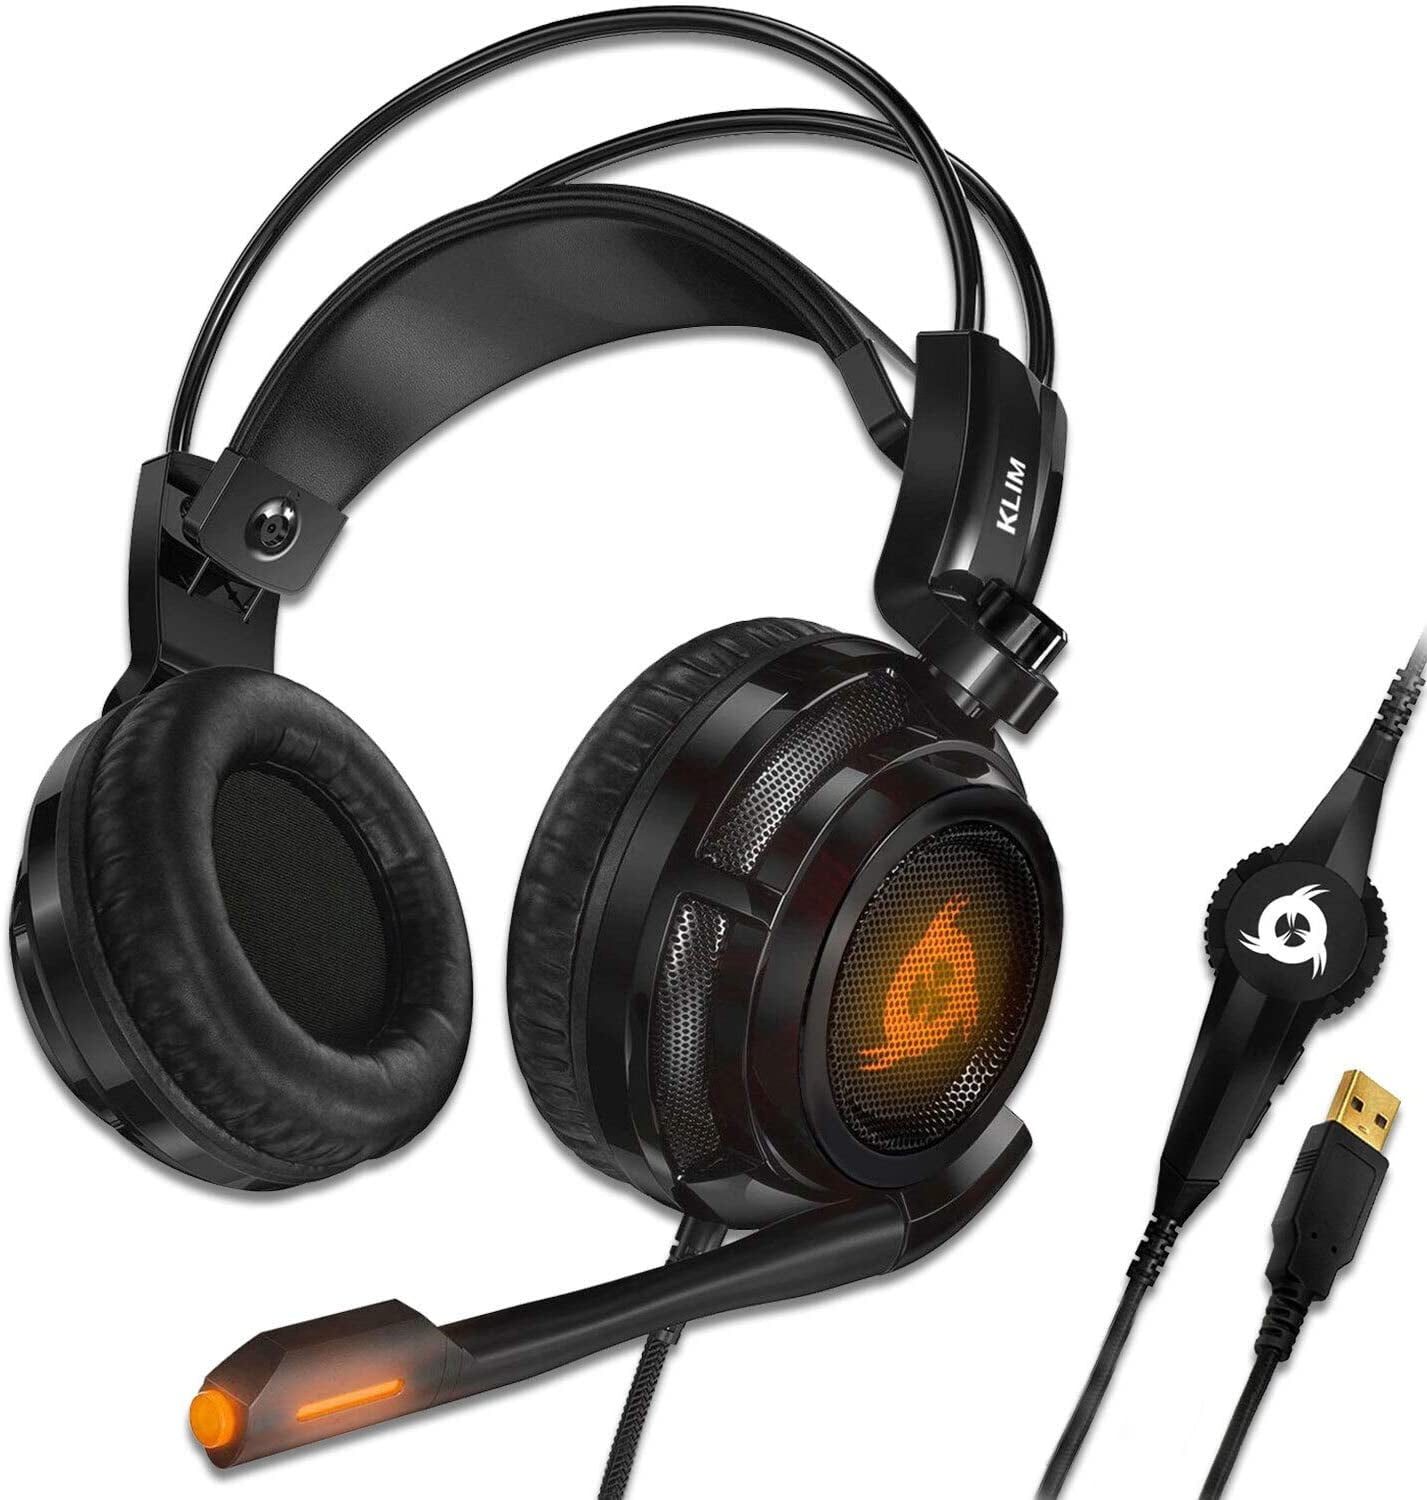 KLIM - USB Gamer Headset with Mic - 7.1 Sound Audio - Integrated Vibrations - Perfect for PC and Gaming New 2022 Version - Black - Walmart.com